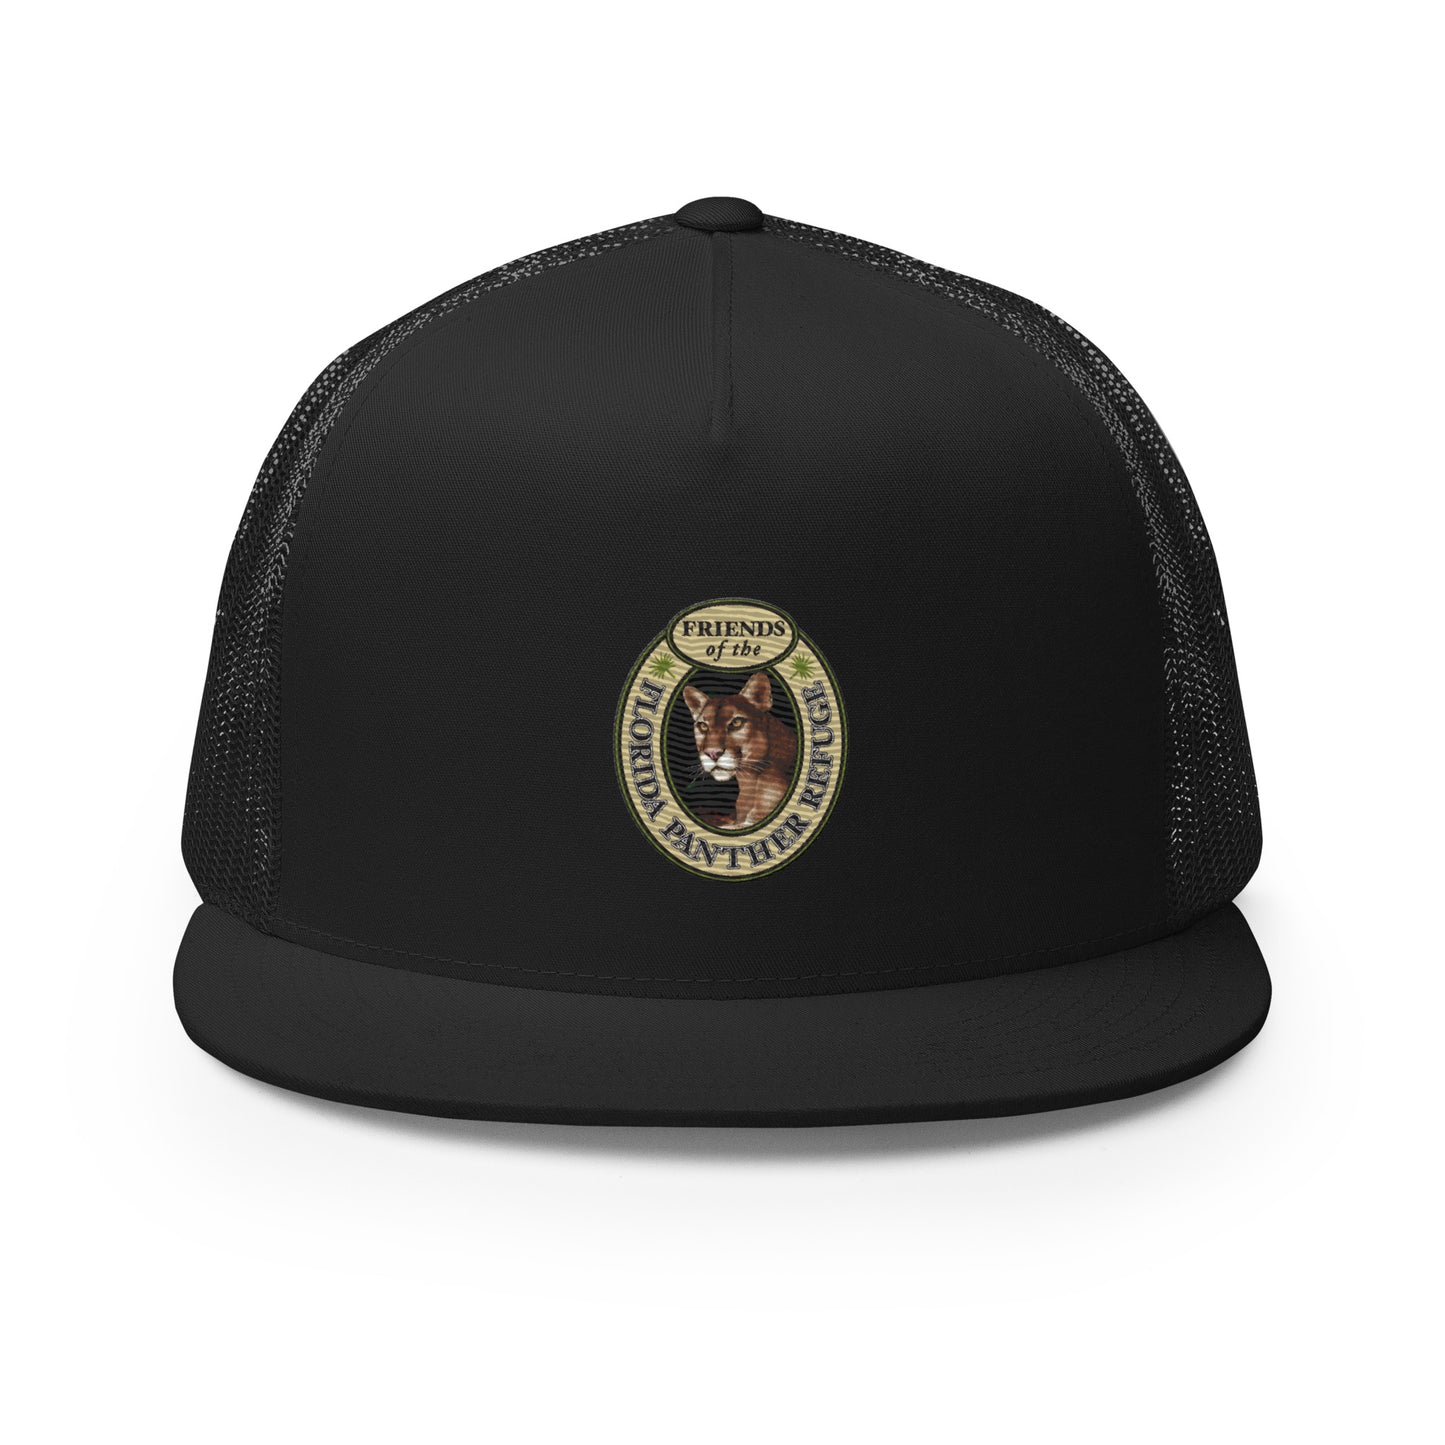 Friends of the Panther Refuge Trucker Cap